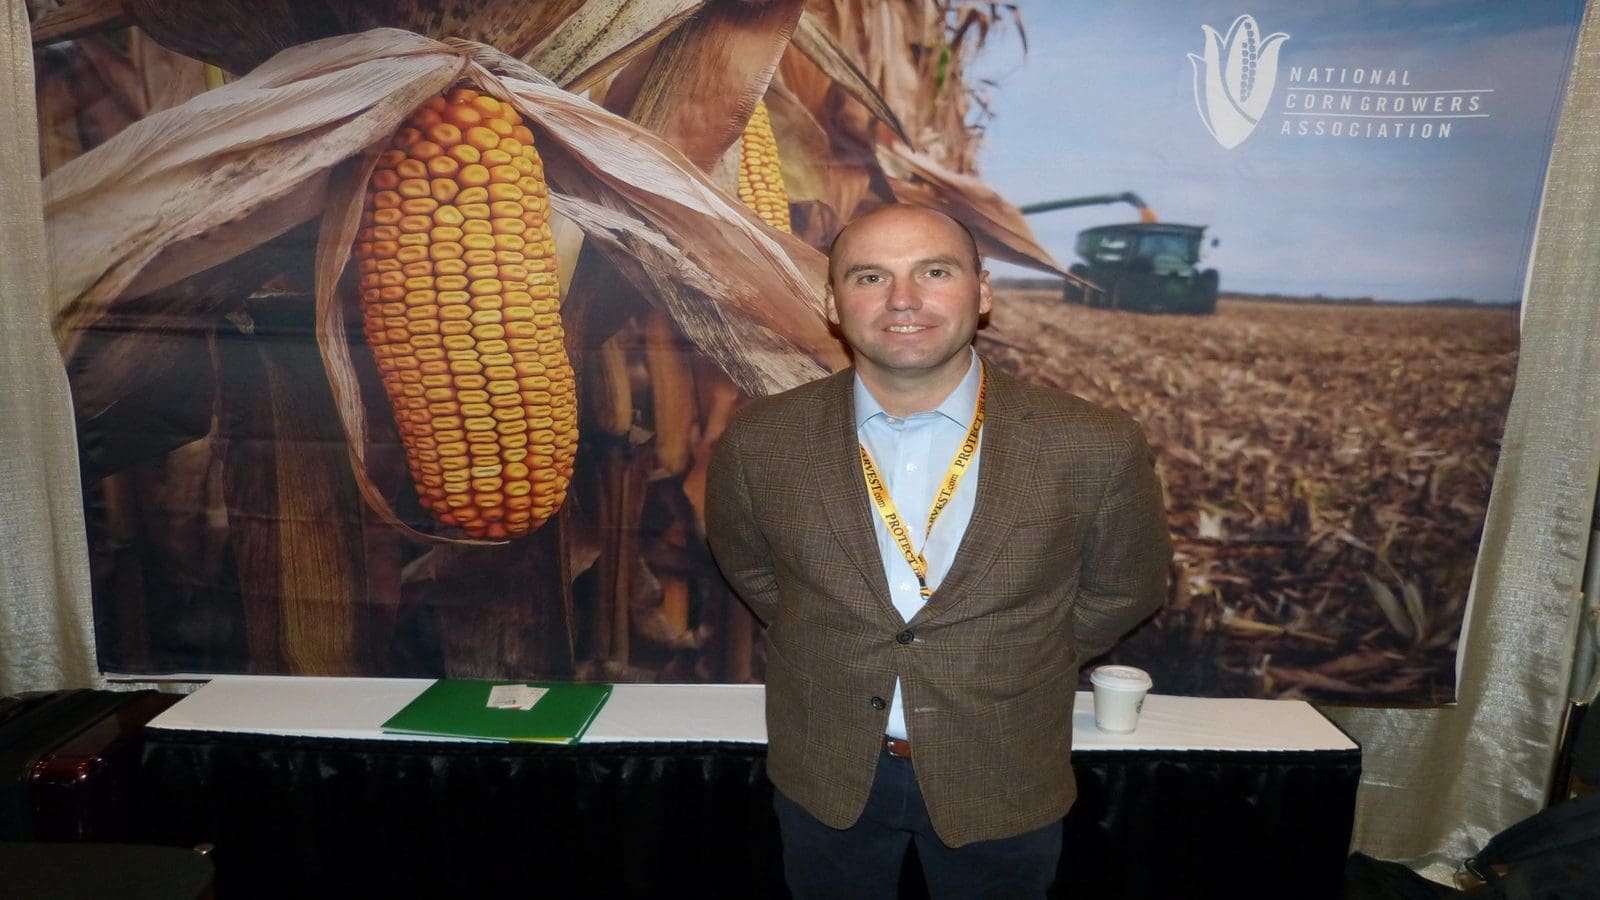 National Corn Growers Association promotes communications VP Neil Caskey to CEO